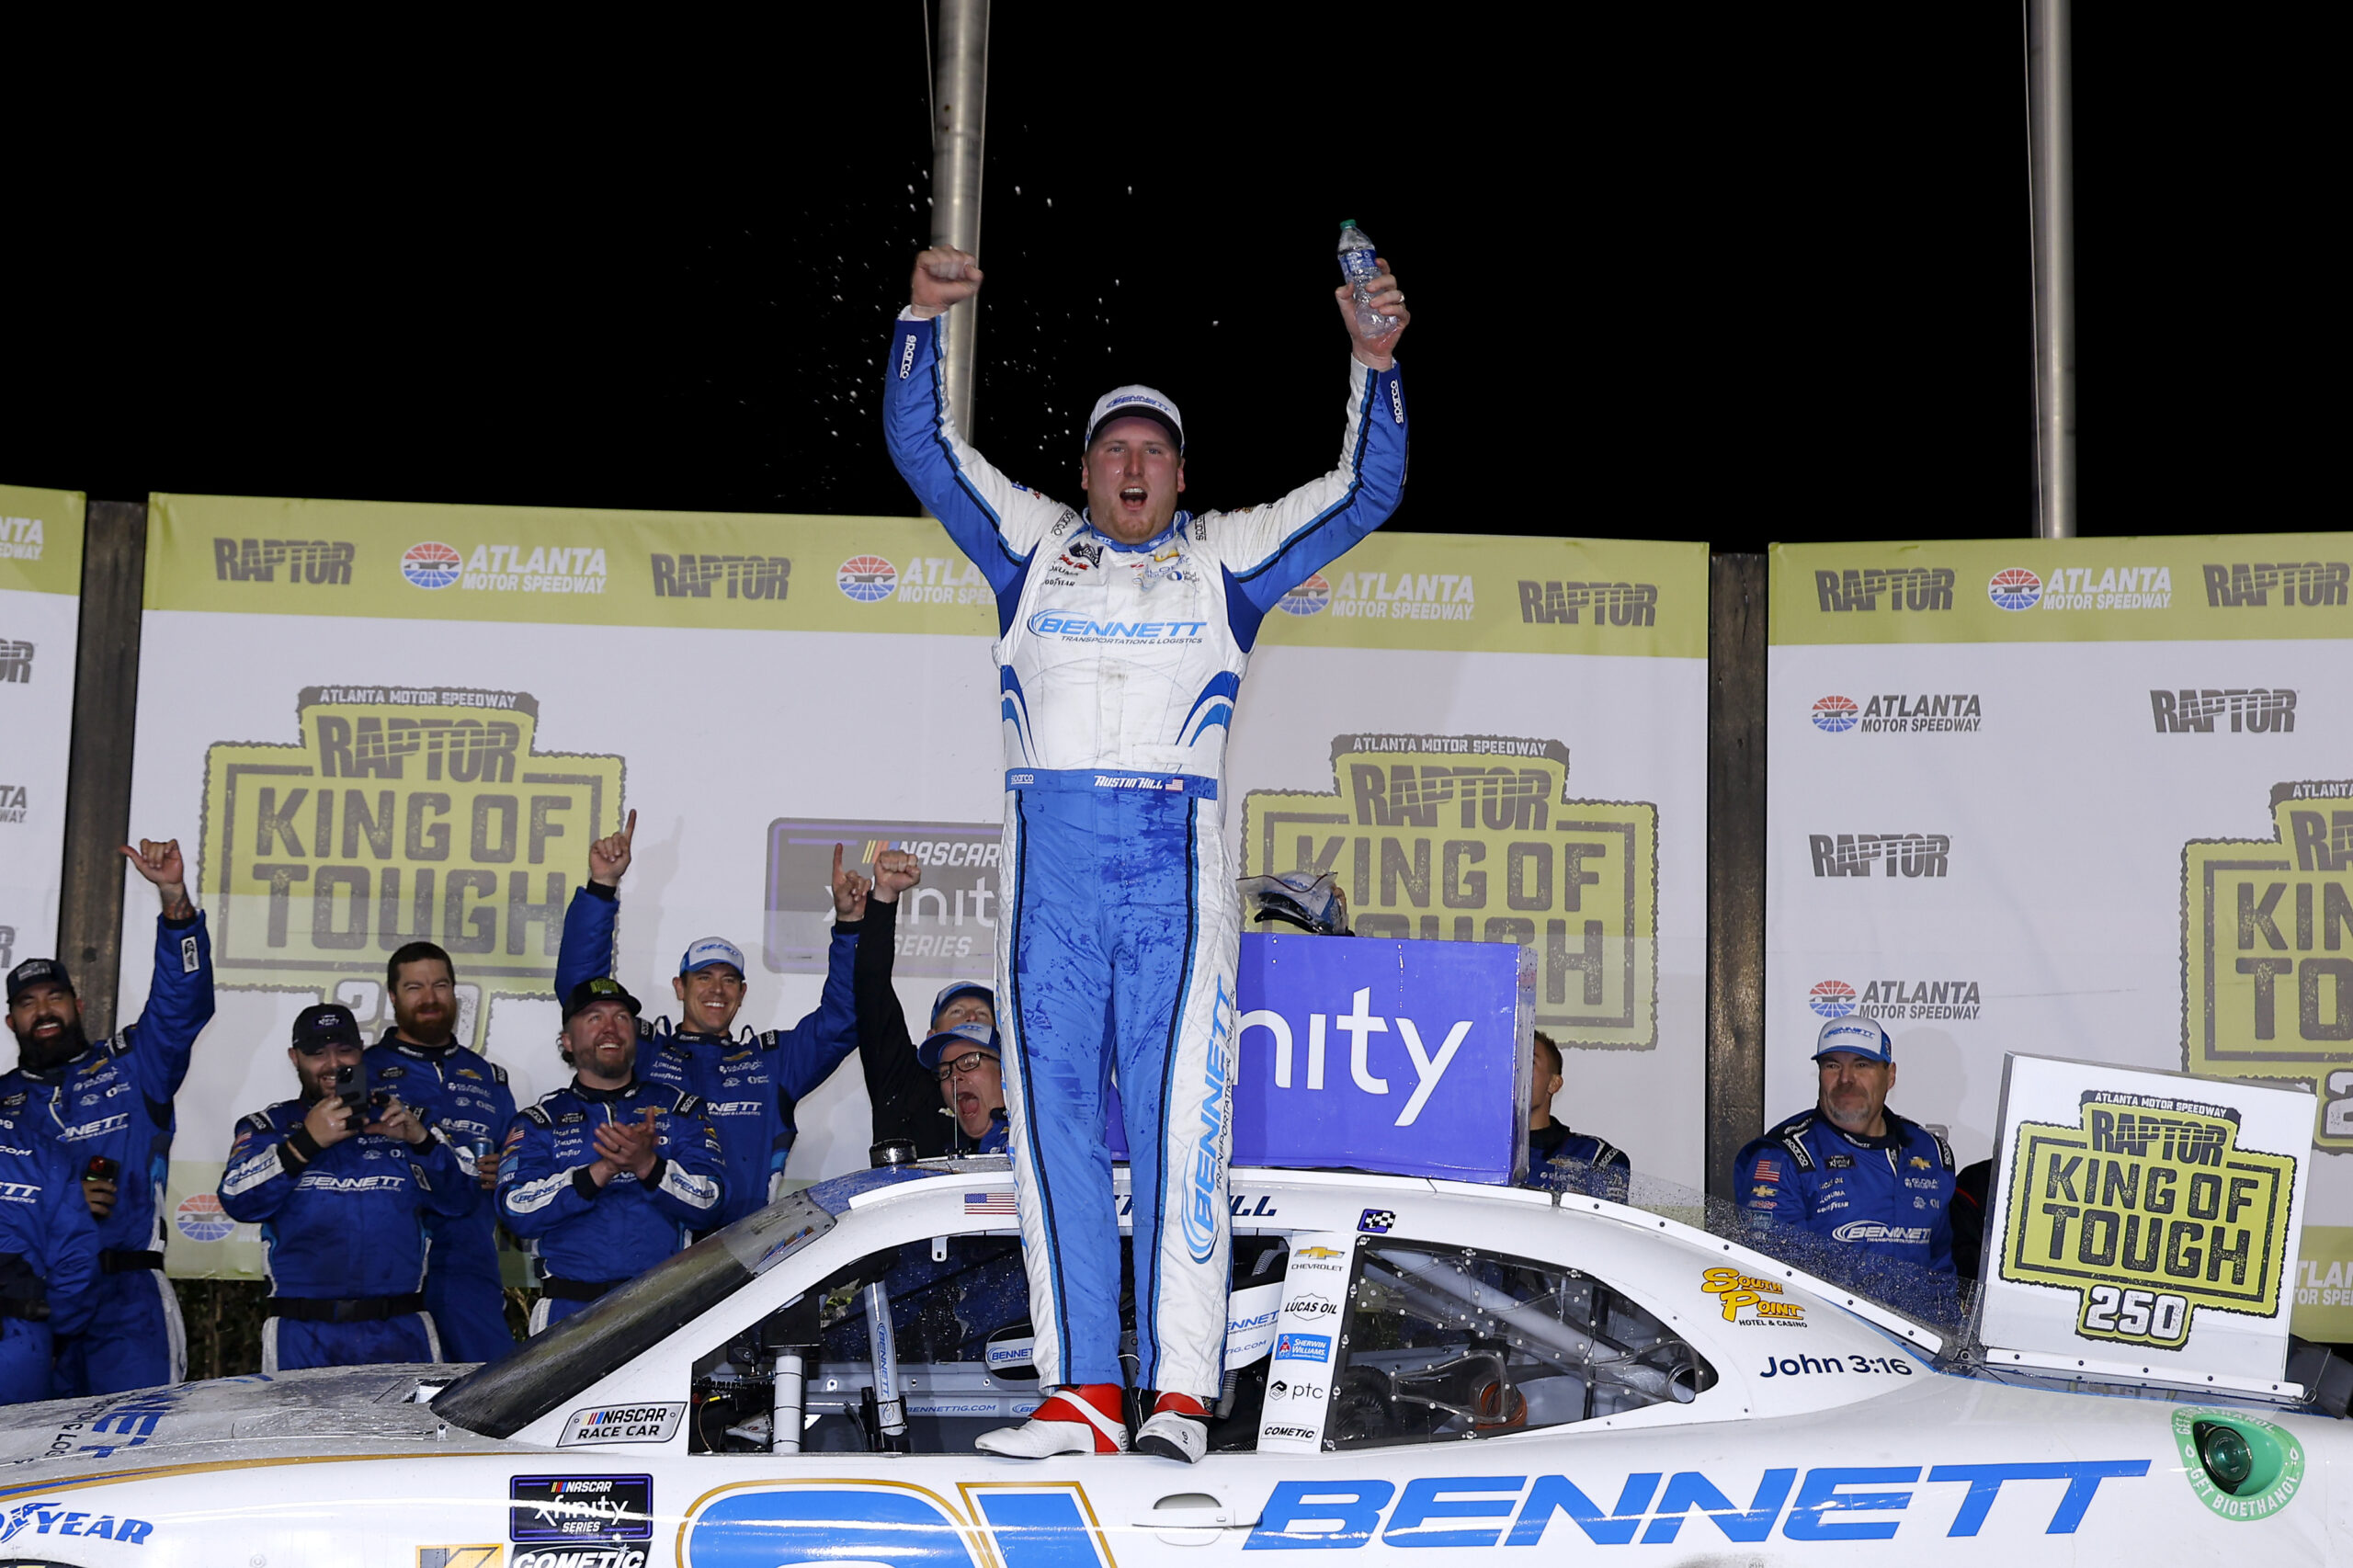 Austin Hill, driver of the #21 Bennett Transportation Chevrolet, celebrates in victory lane after winning the NASCAR Xfinity Series King of Tough 250 at Atlanta Motor Speedway on February 24, 2024 in Hampton, Georgia. (Photo by Todd Kirkland/Getty Images)